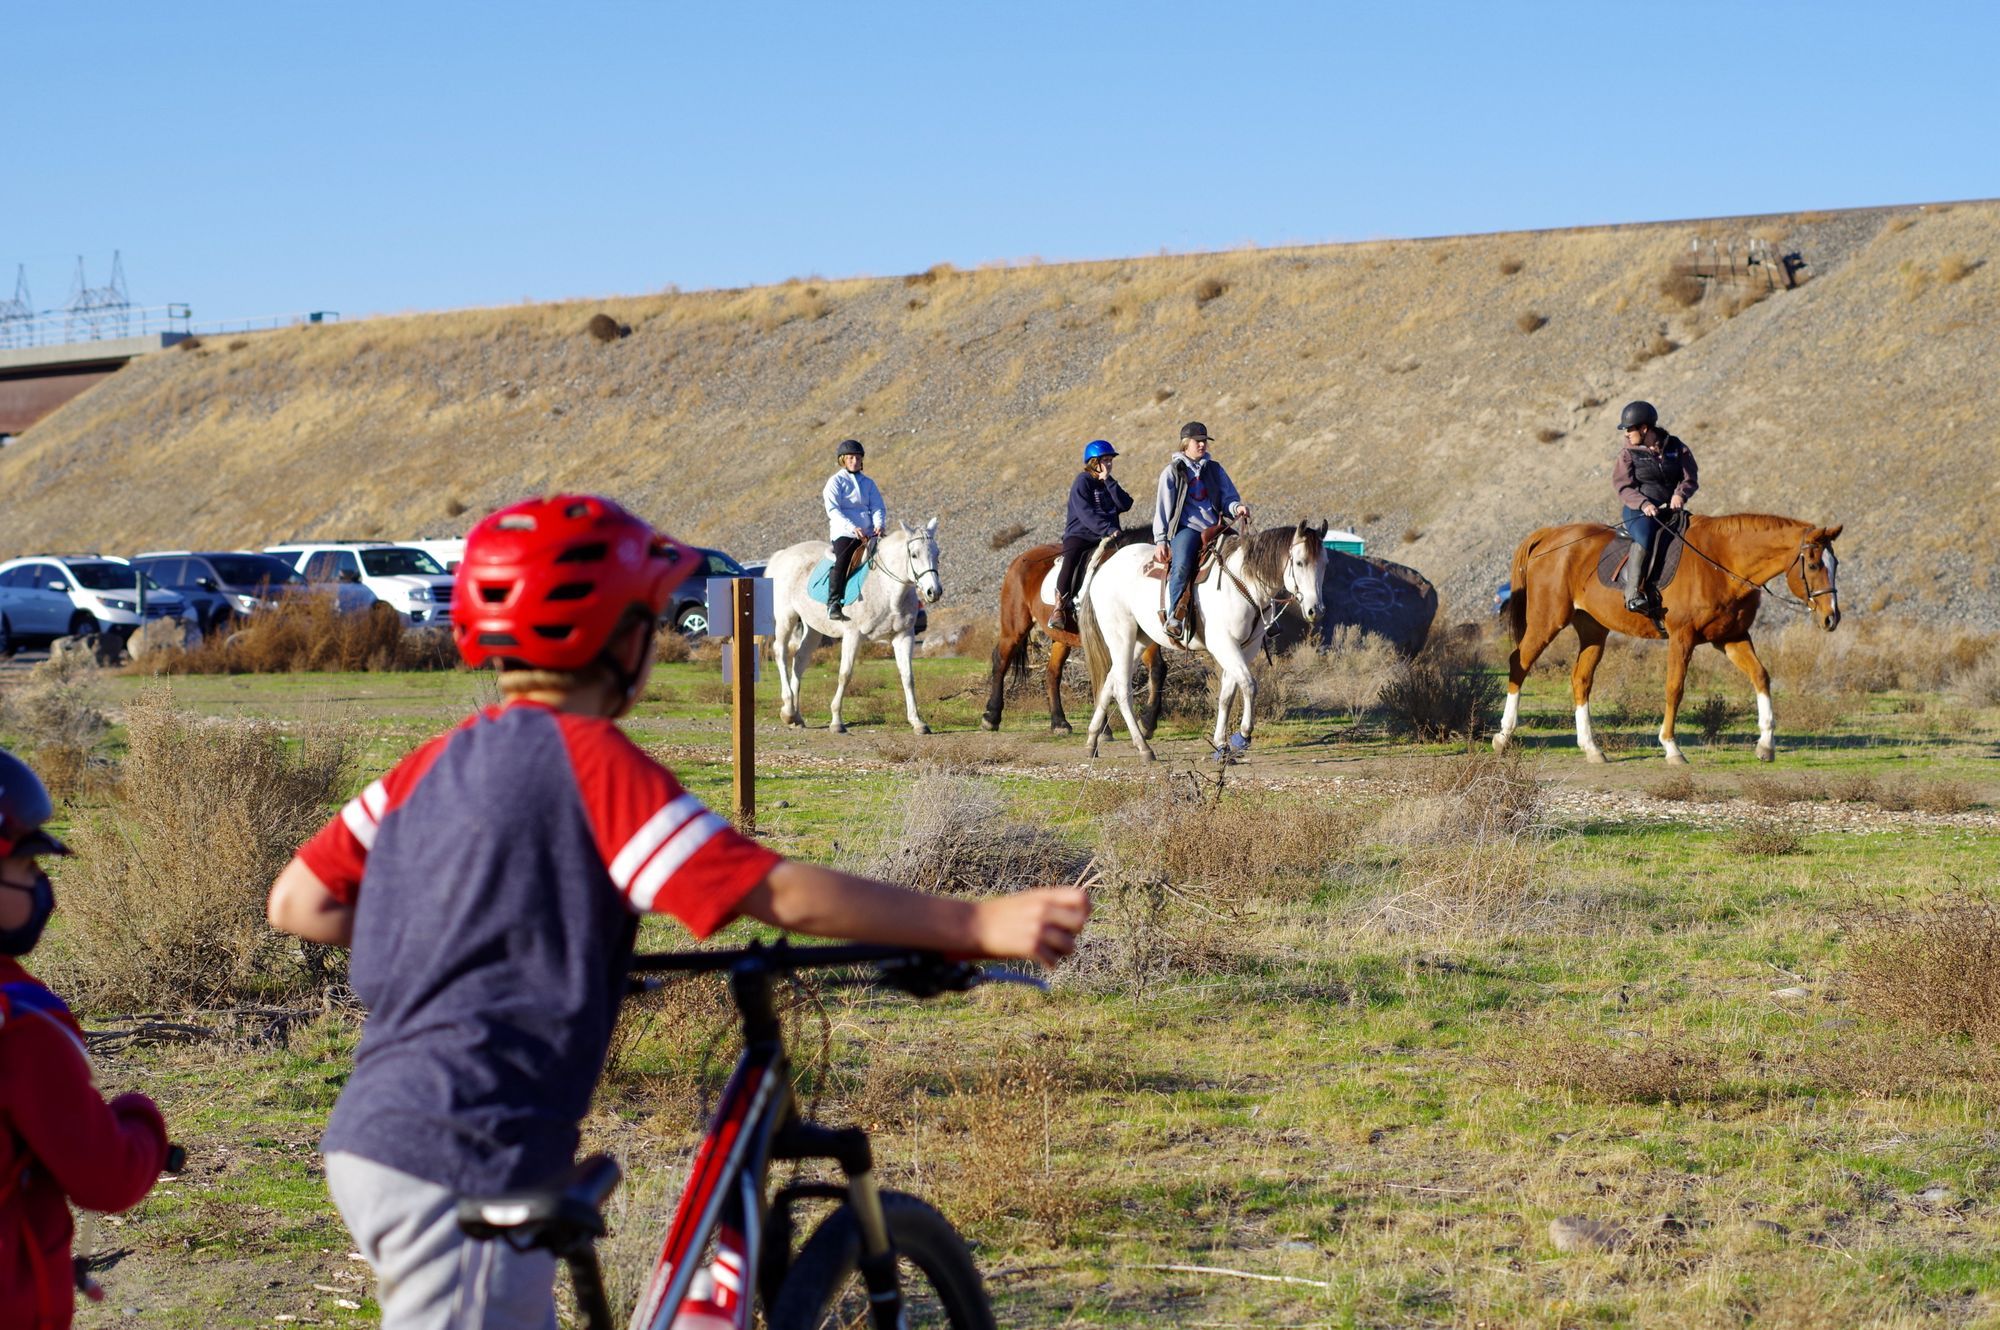 Image shows children on bikes waiting as a group of people passes by on horses